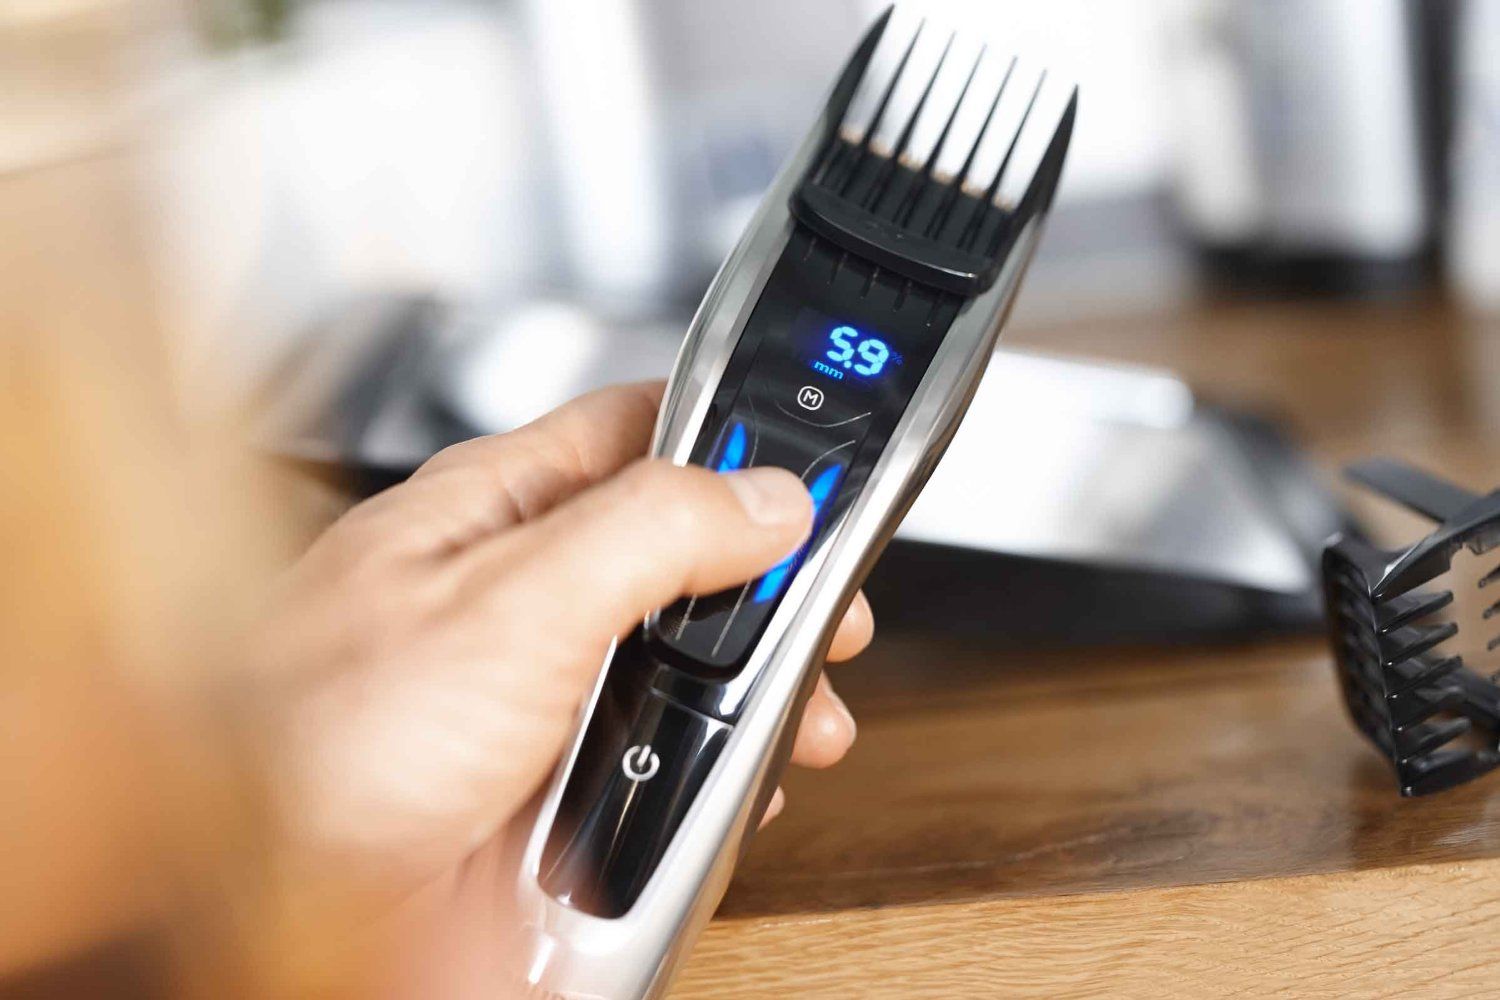 philips hair trimmer 9000